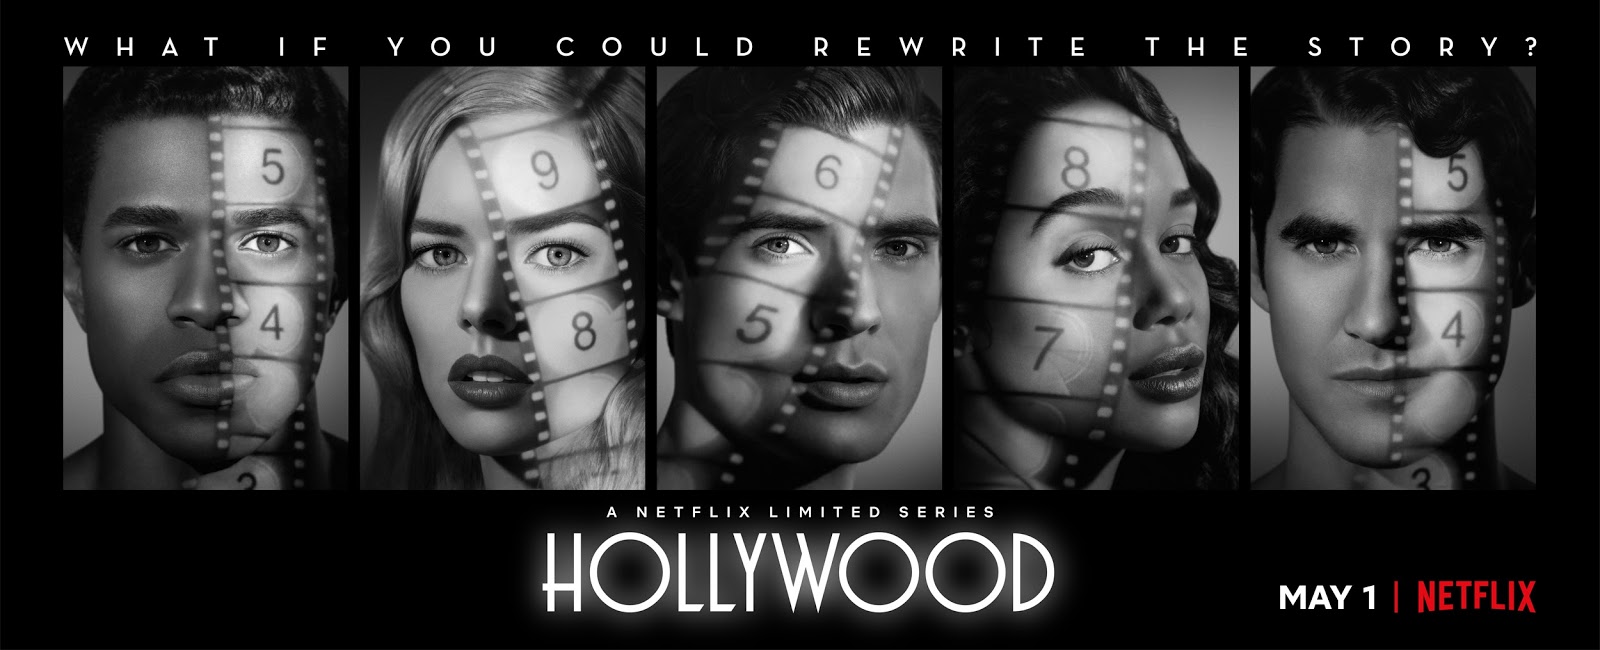 WATCH: Ryan Murphy's Limited Series HOLLYWOOD Trailer - on Netflix Starting May 1, 2020